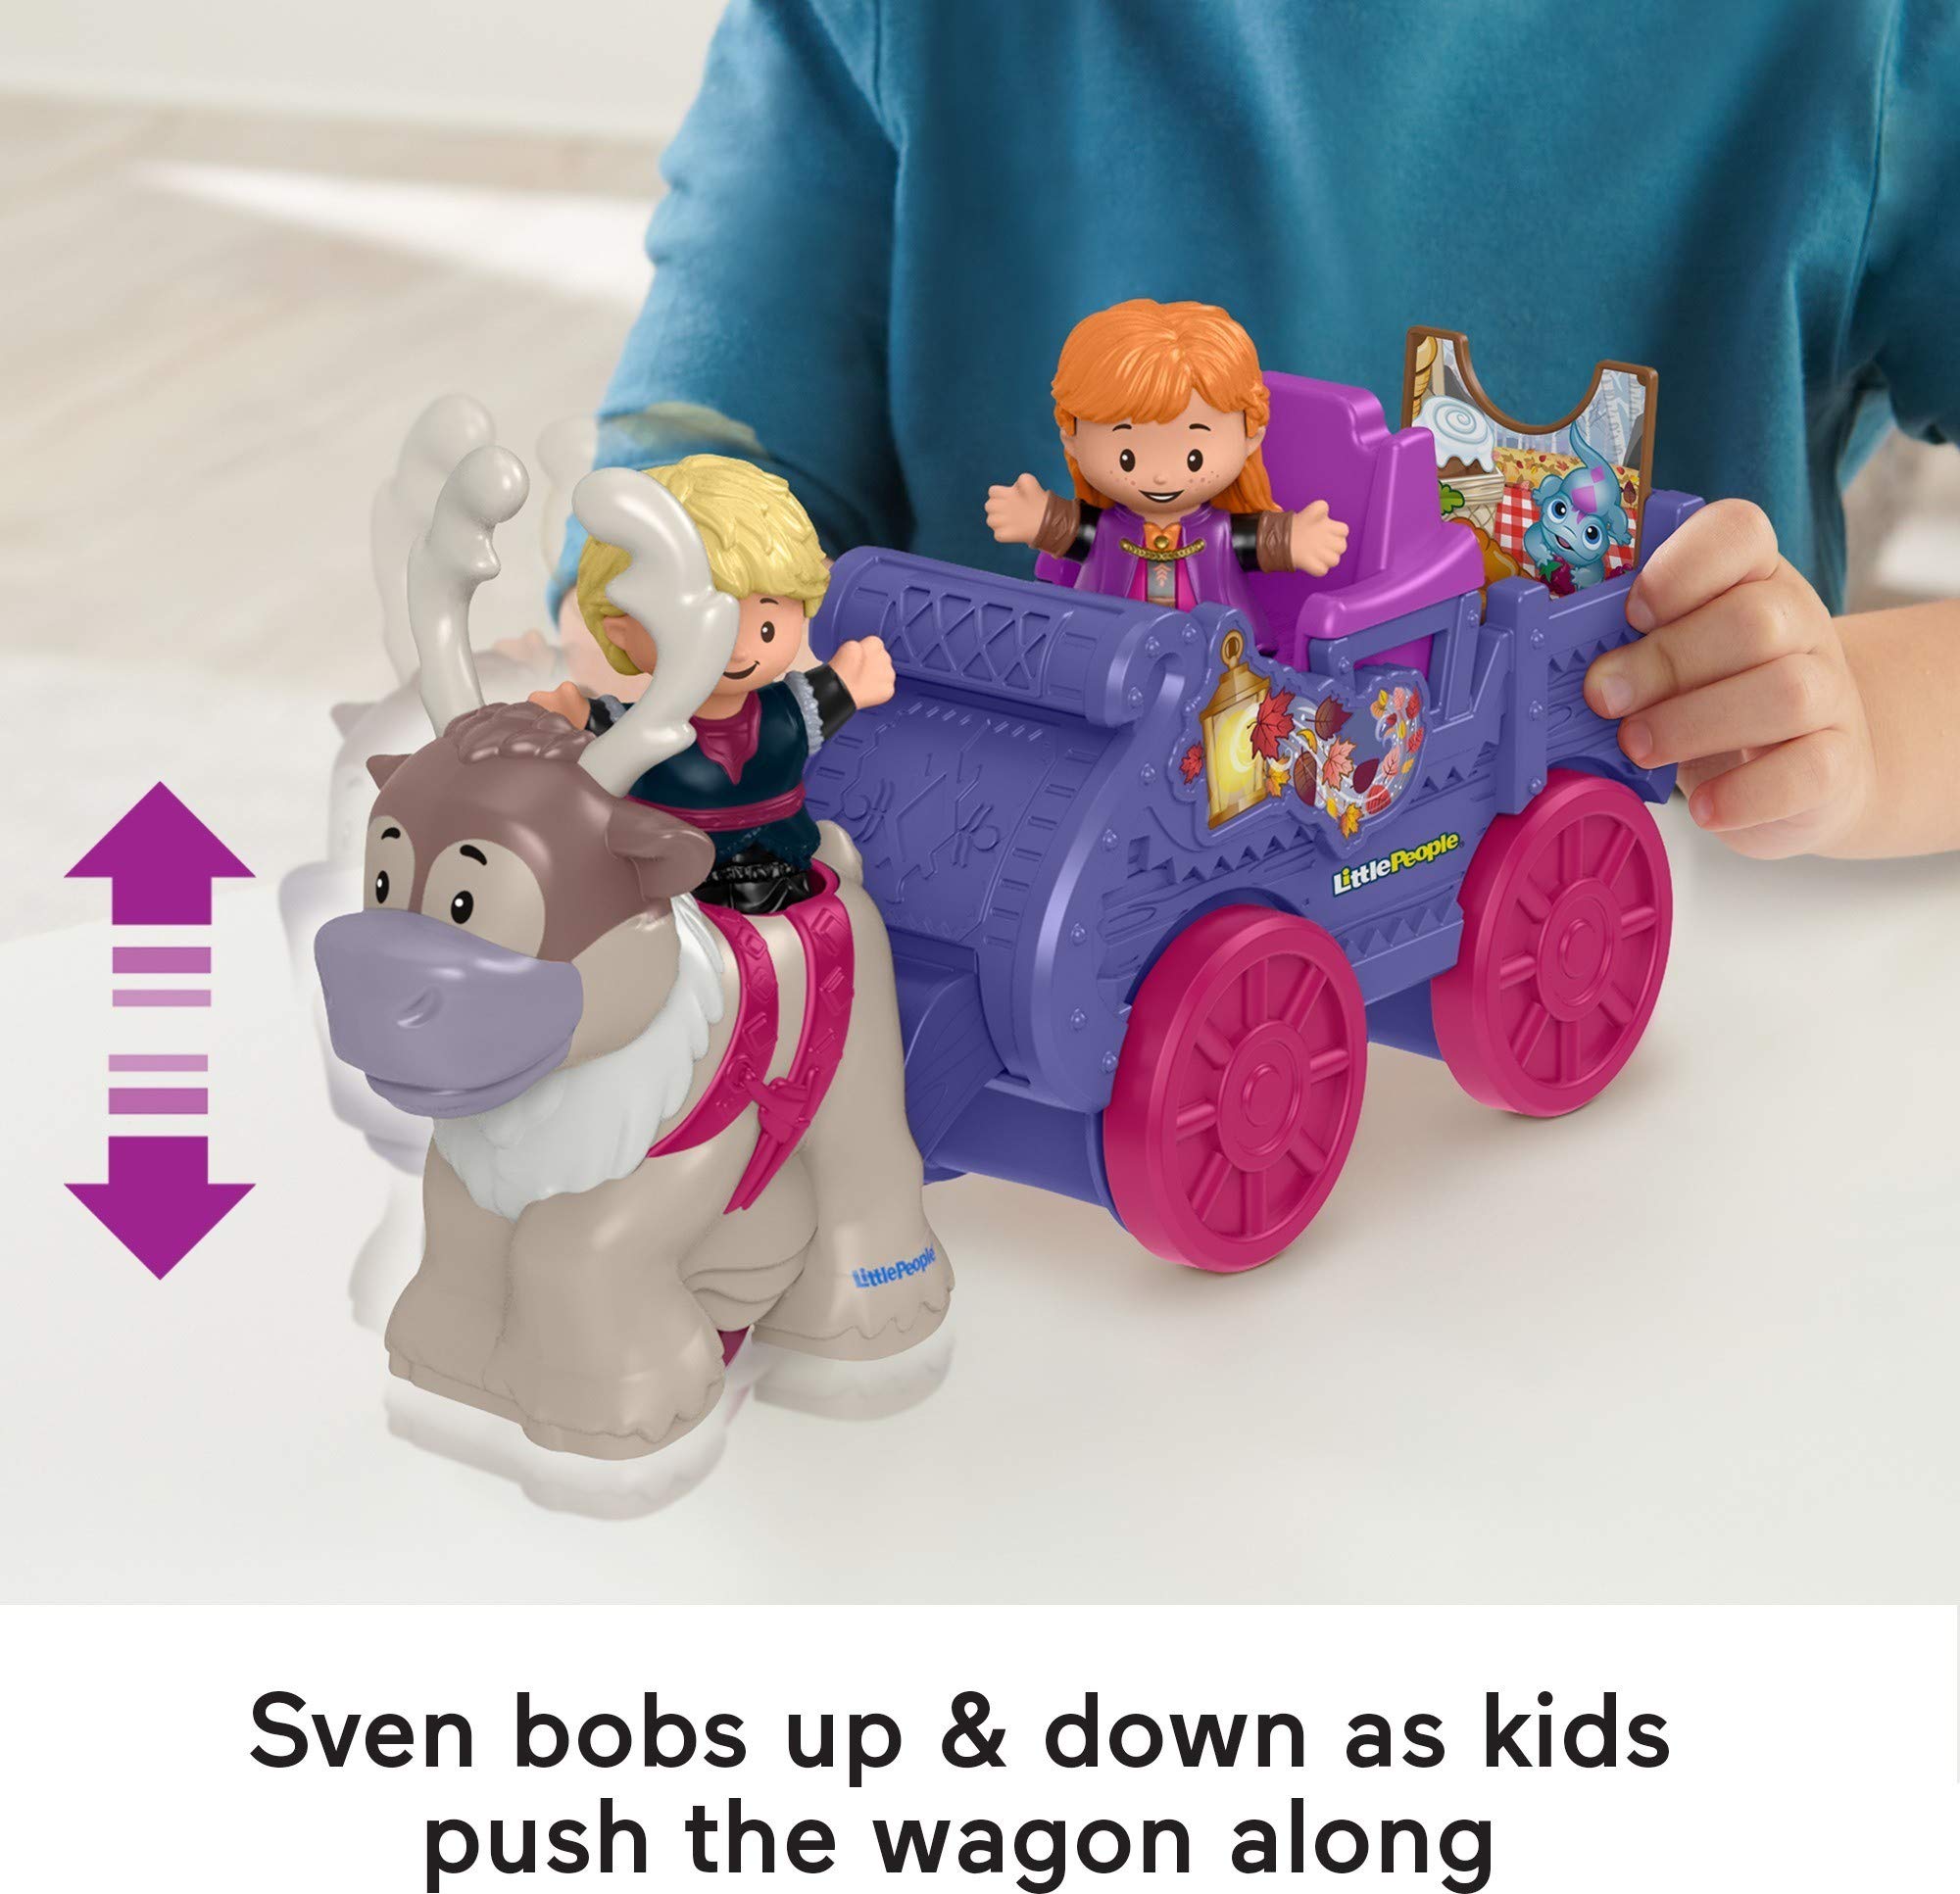 Fisher-Price Little People Disney Frozen 2 Anna & Kristoff's Wagon, Push-Along Vehicle with Character Figures for Toddlers and Preschool Kids